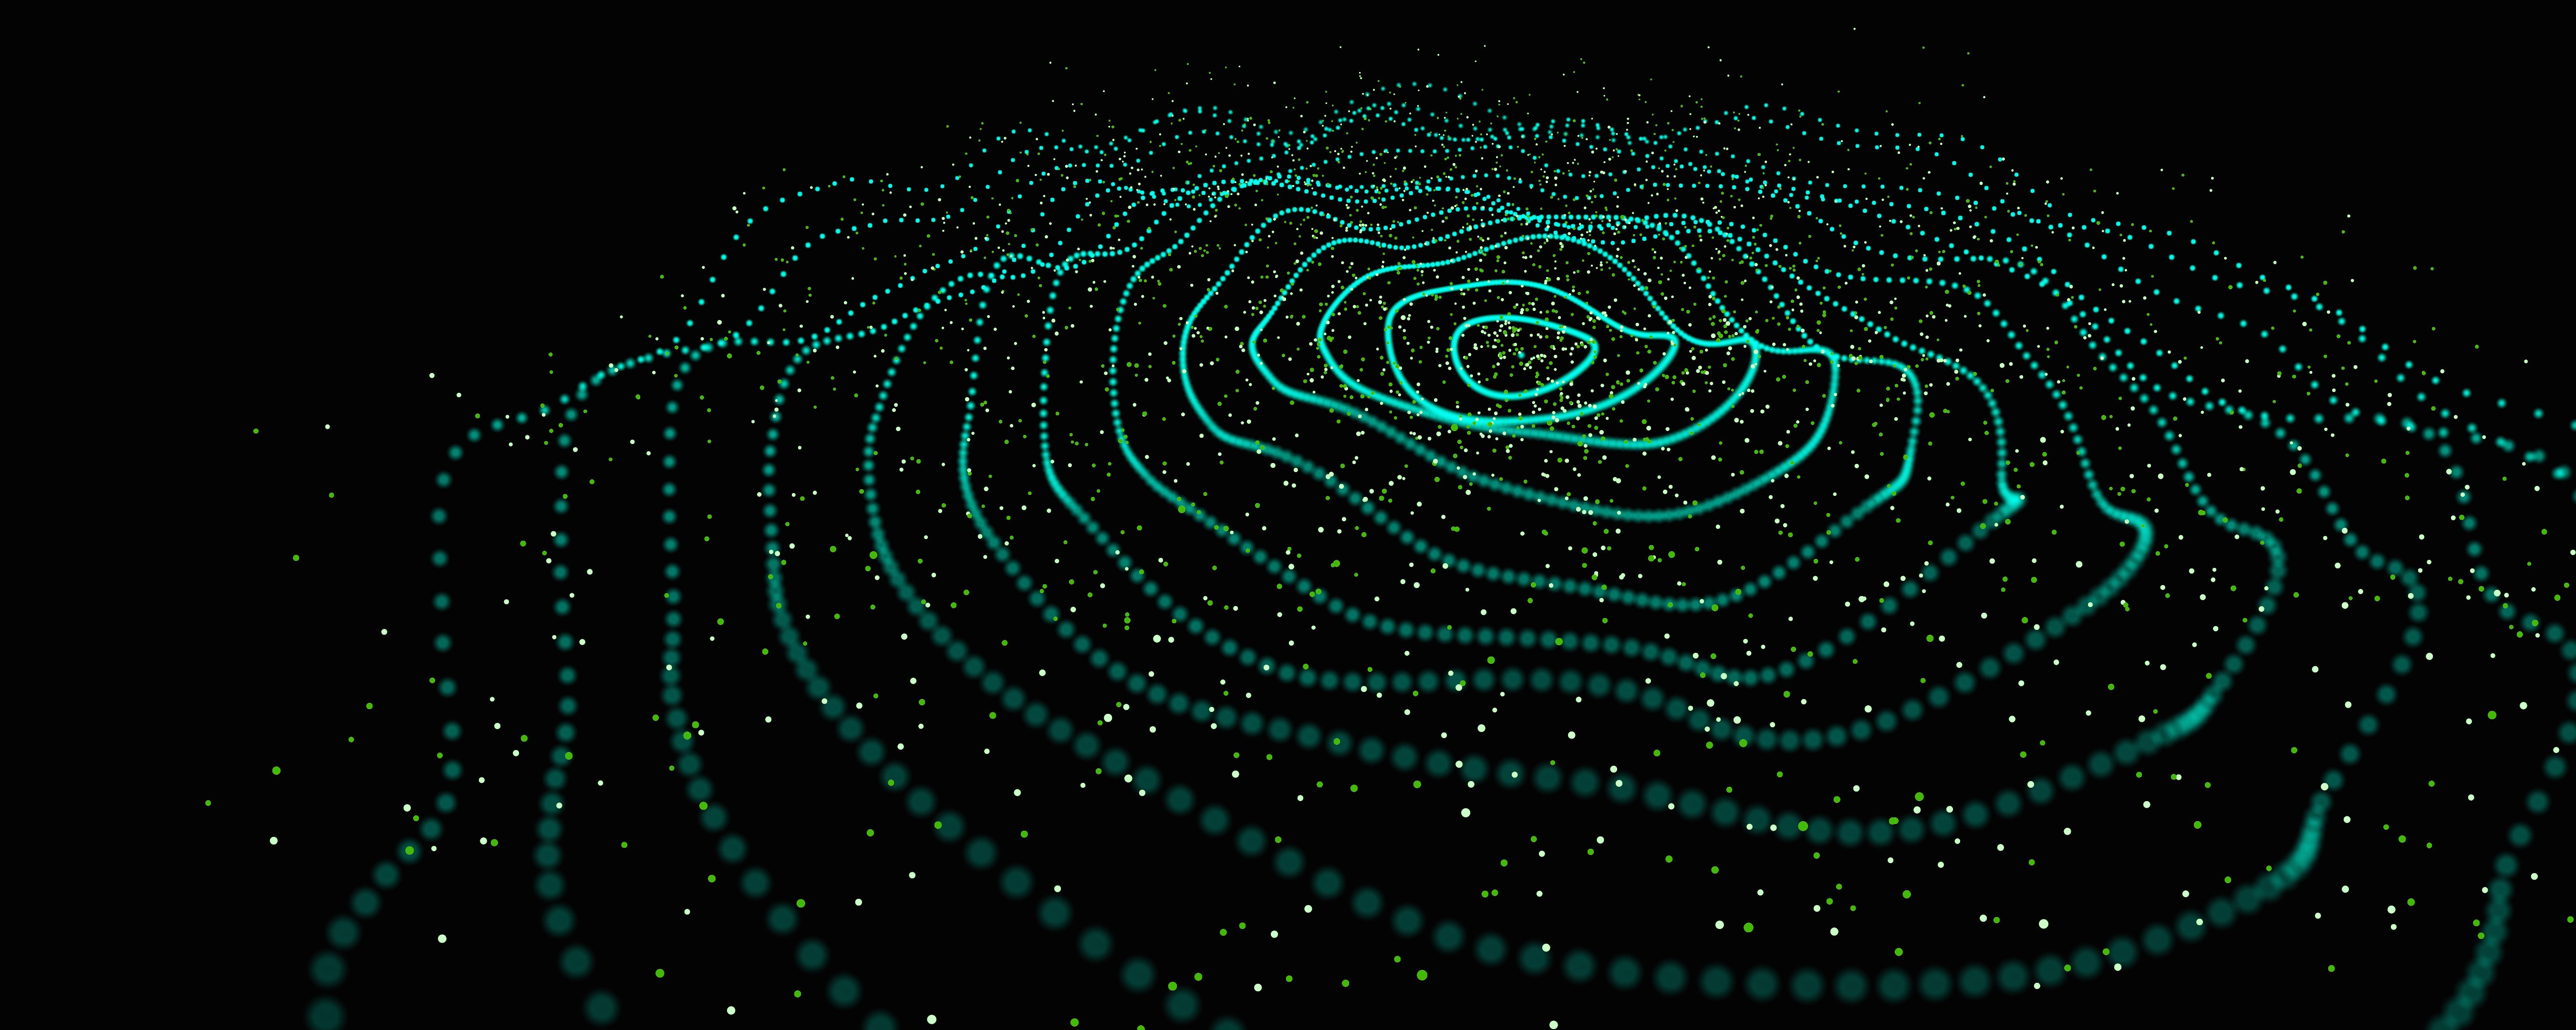 Green dynamic wave of particles on black background